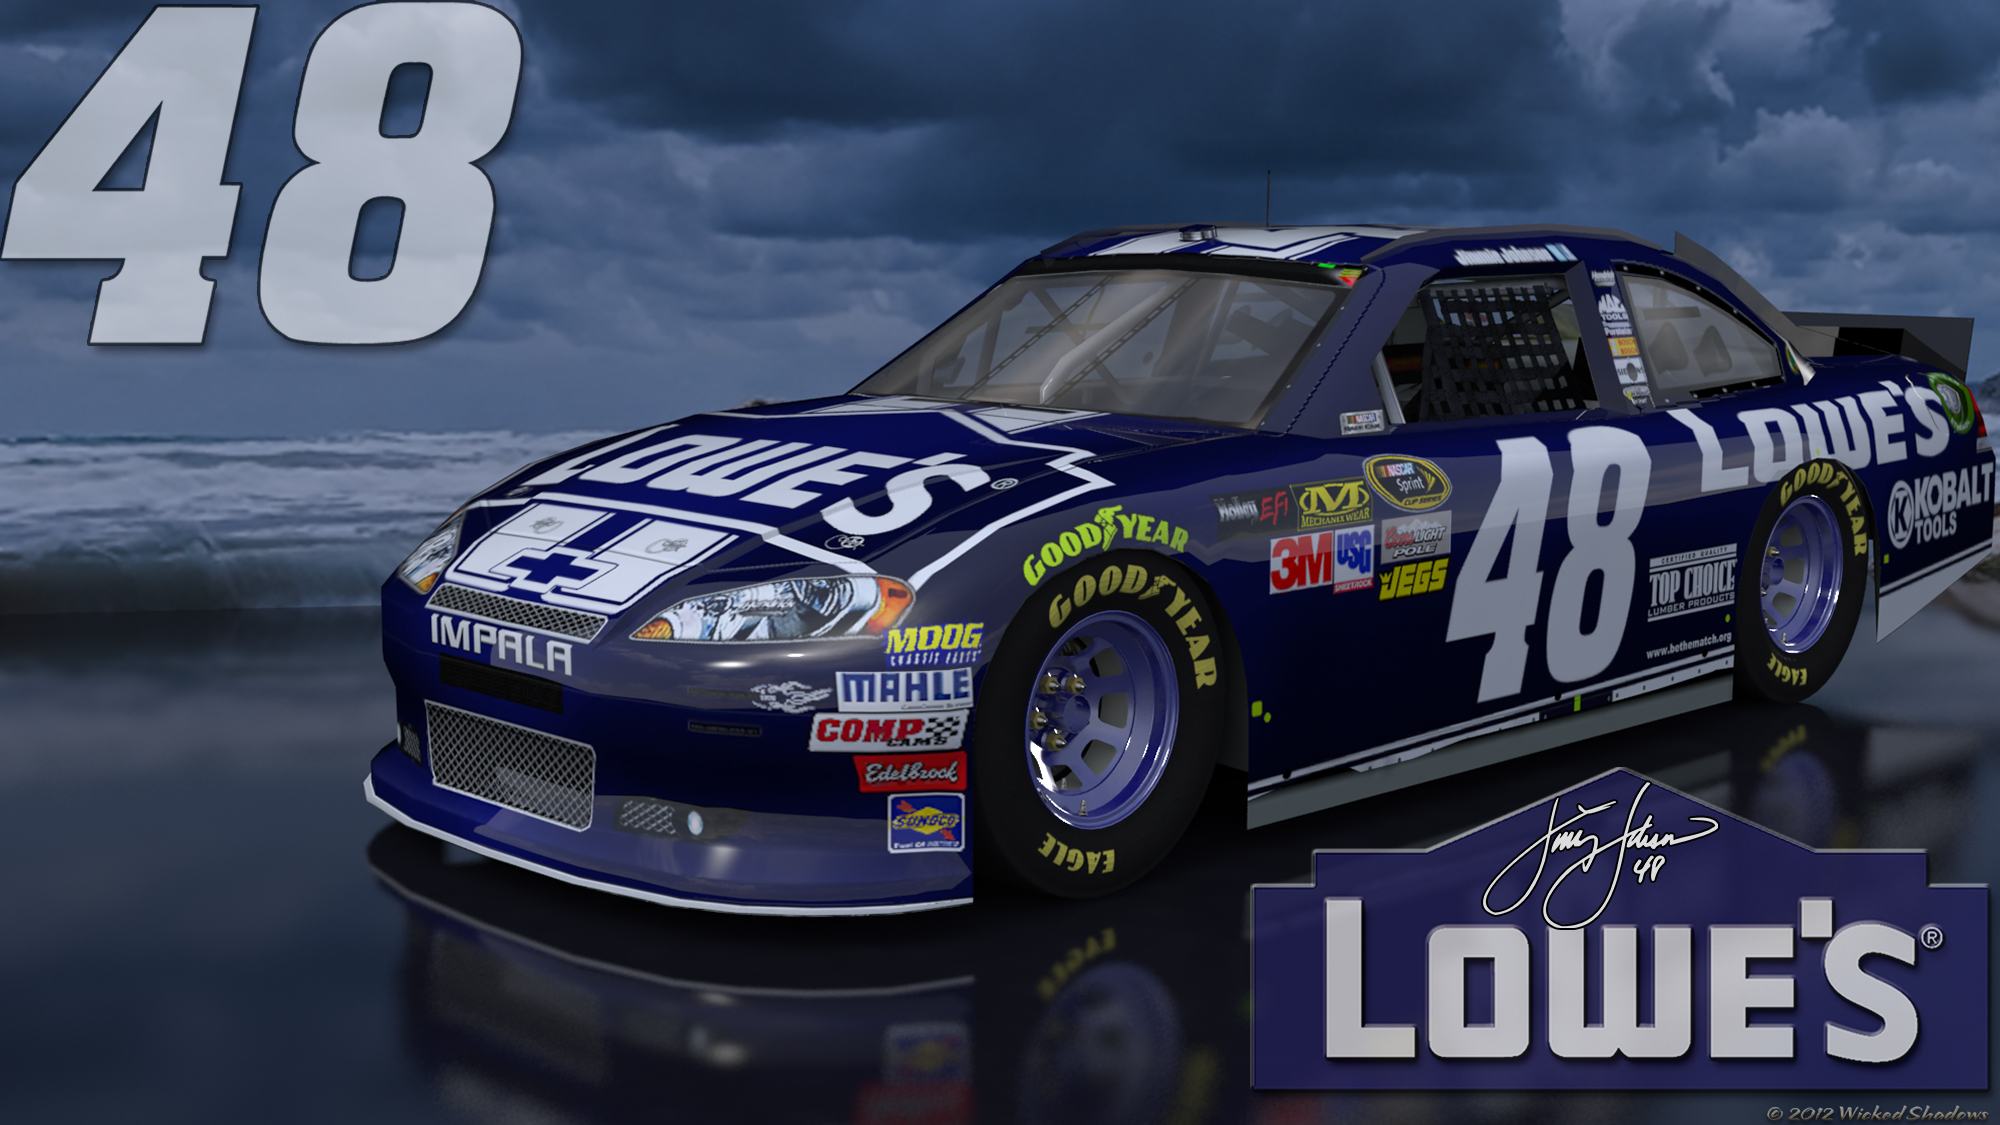 Wallpaper Background Cars Jimmie Johnson